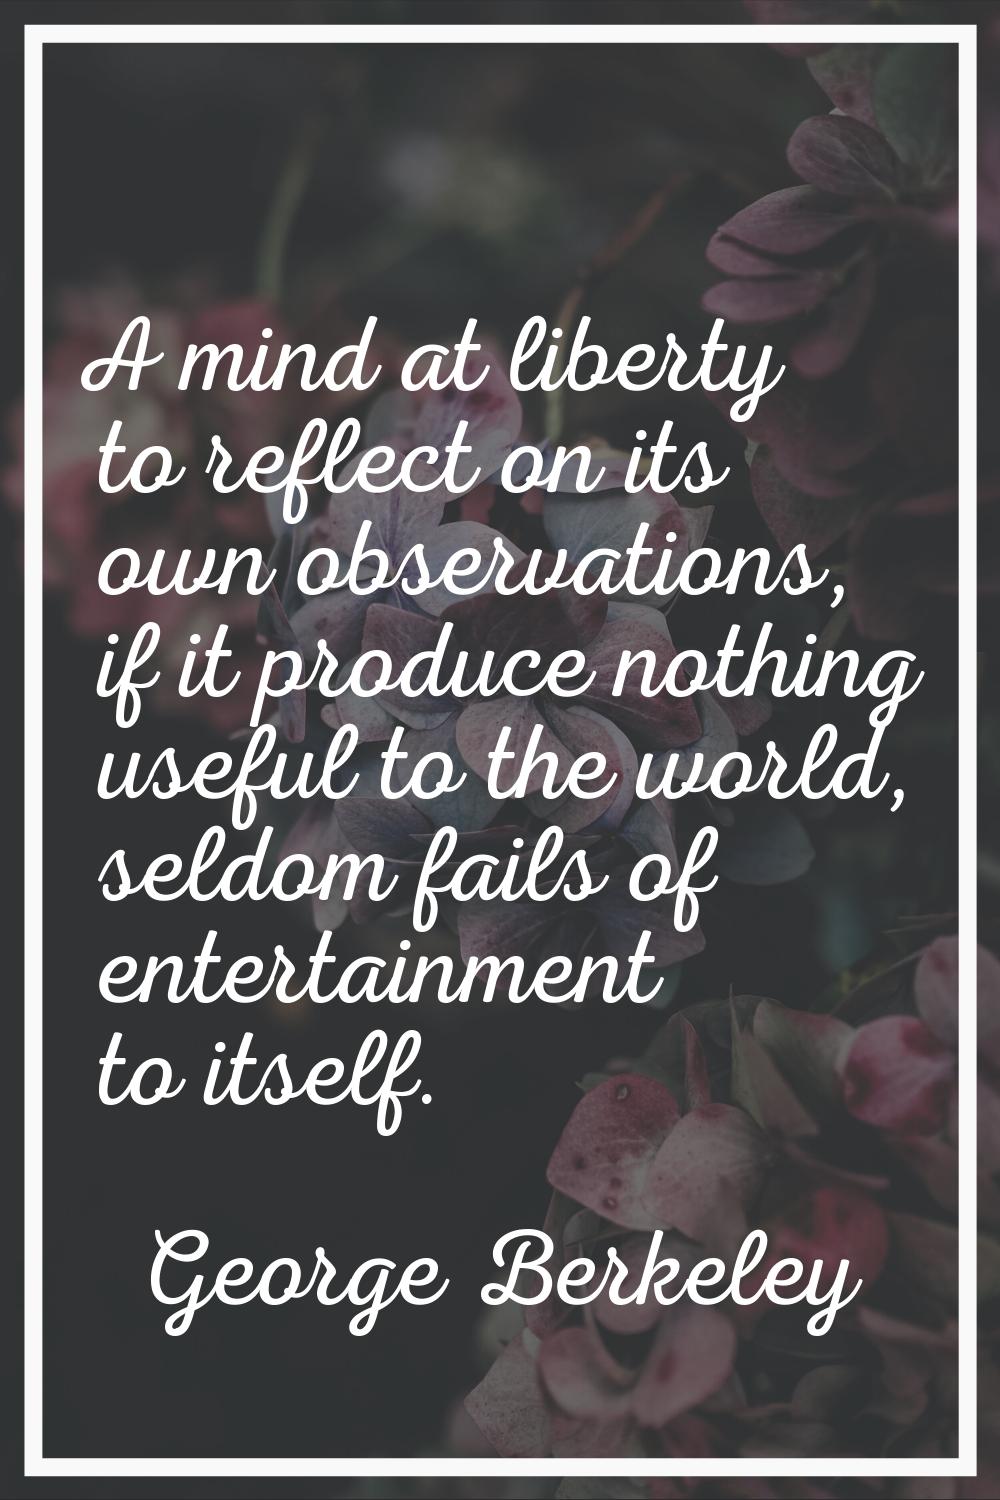 A mind at liberty to reflect on its own observations, if it produce nothing useful to the world, se